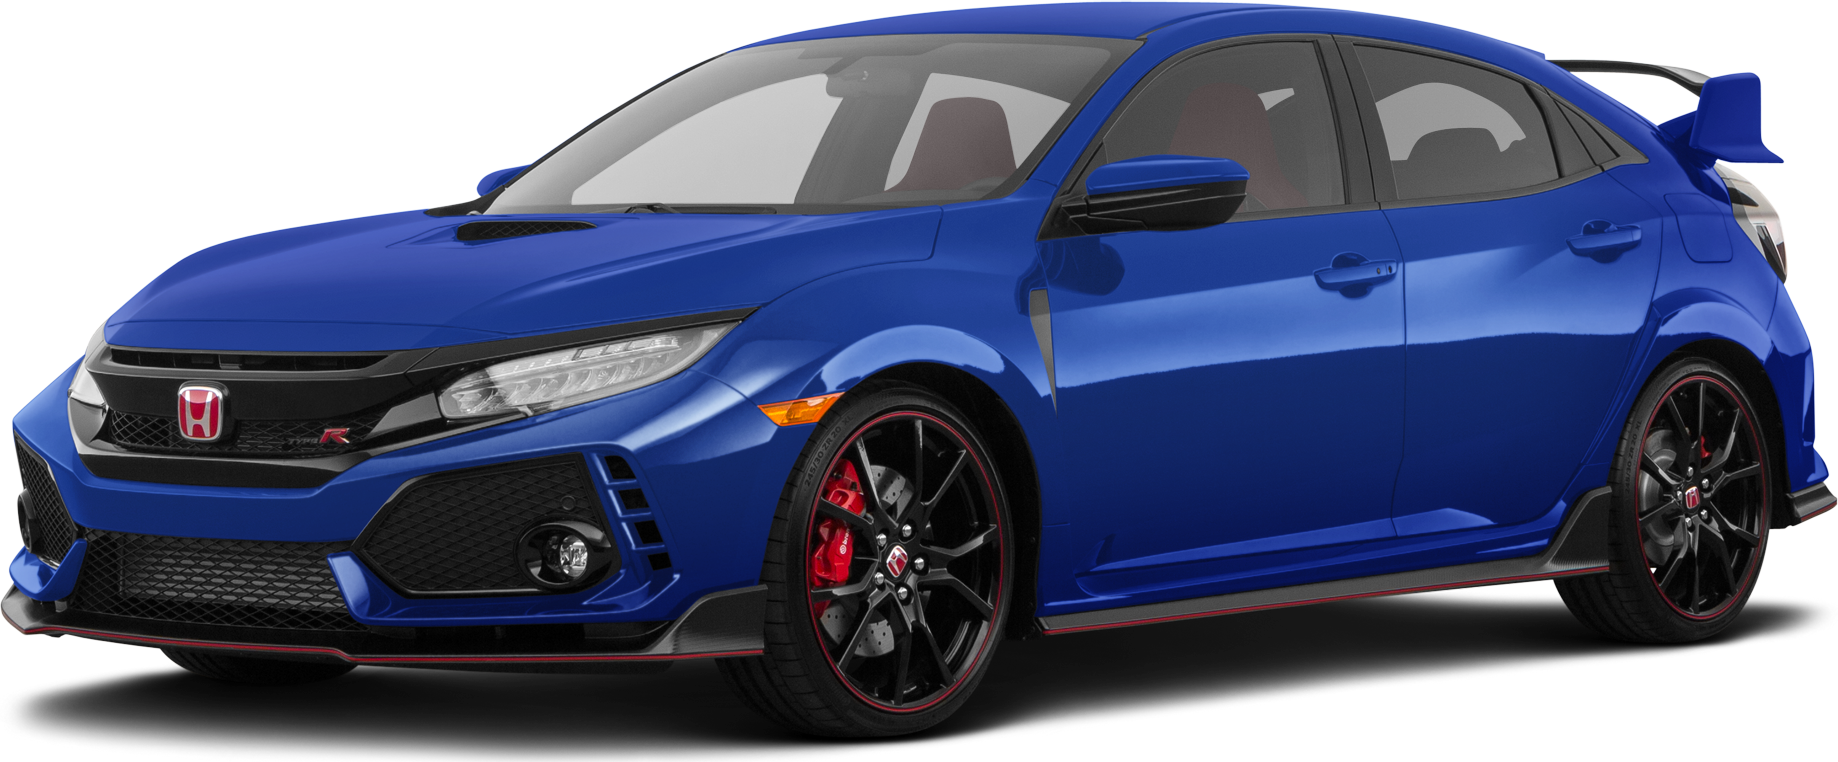 17 Honda Civic Type R Values Cars For Sale Kelley Blue Book